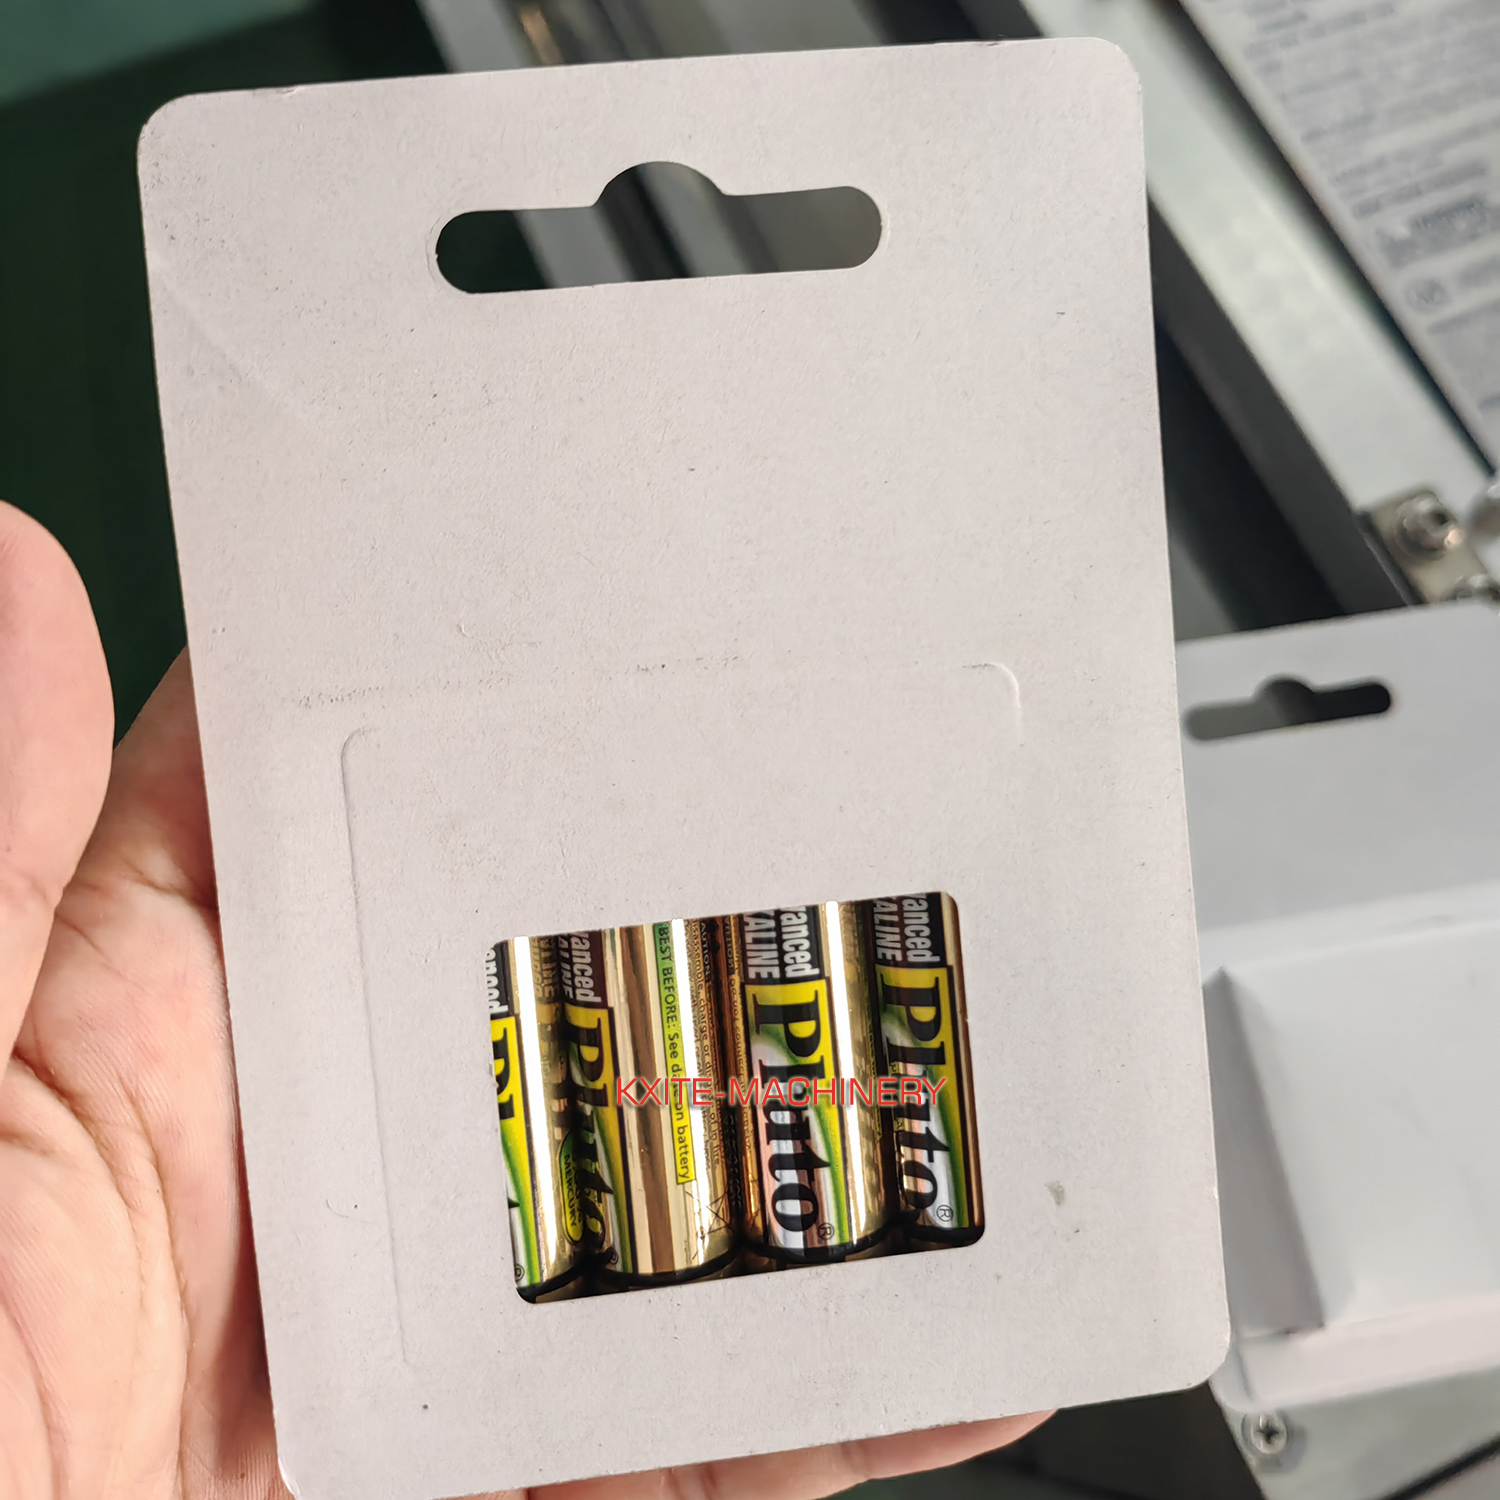  Automatic Alkaline Battery All Paper Blister Packing Machine